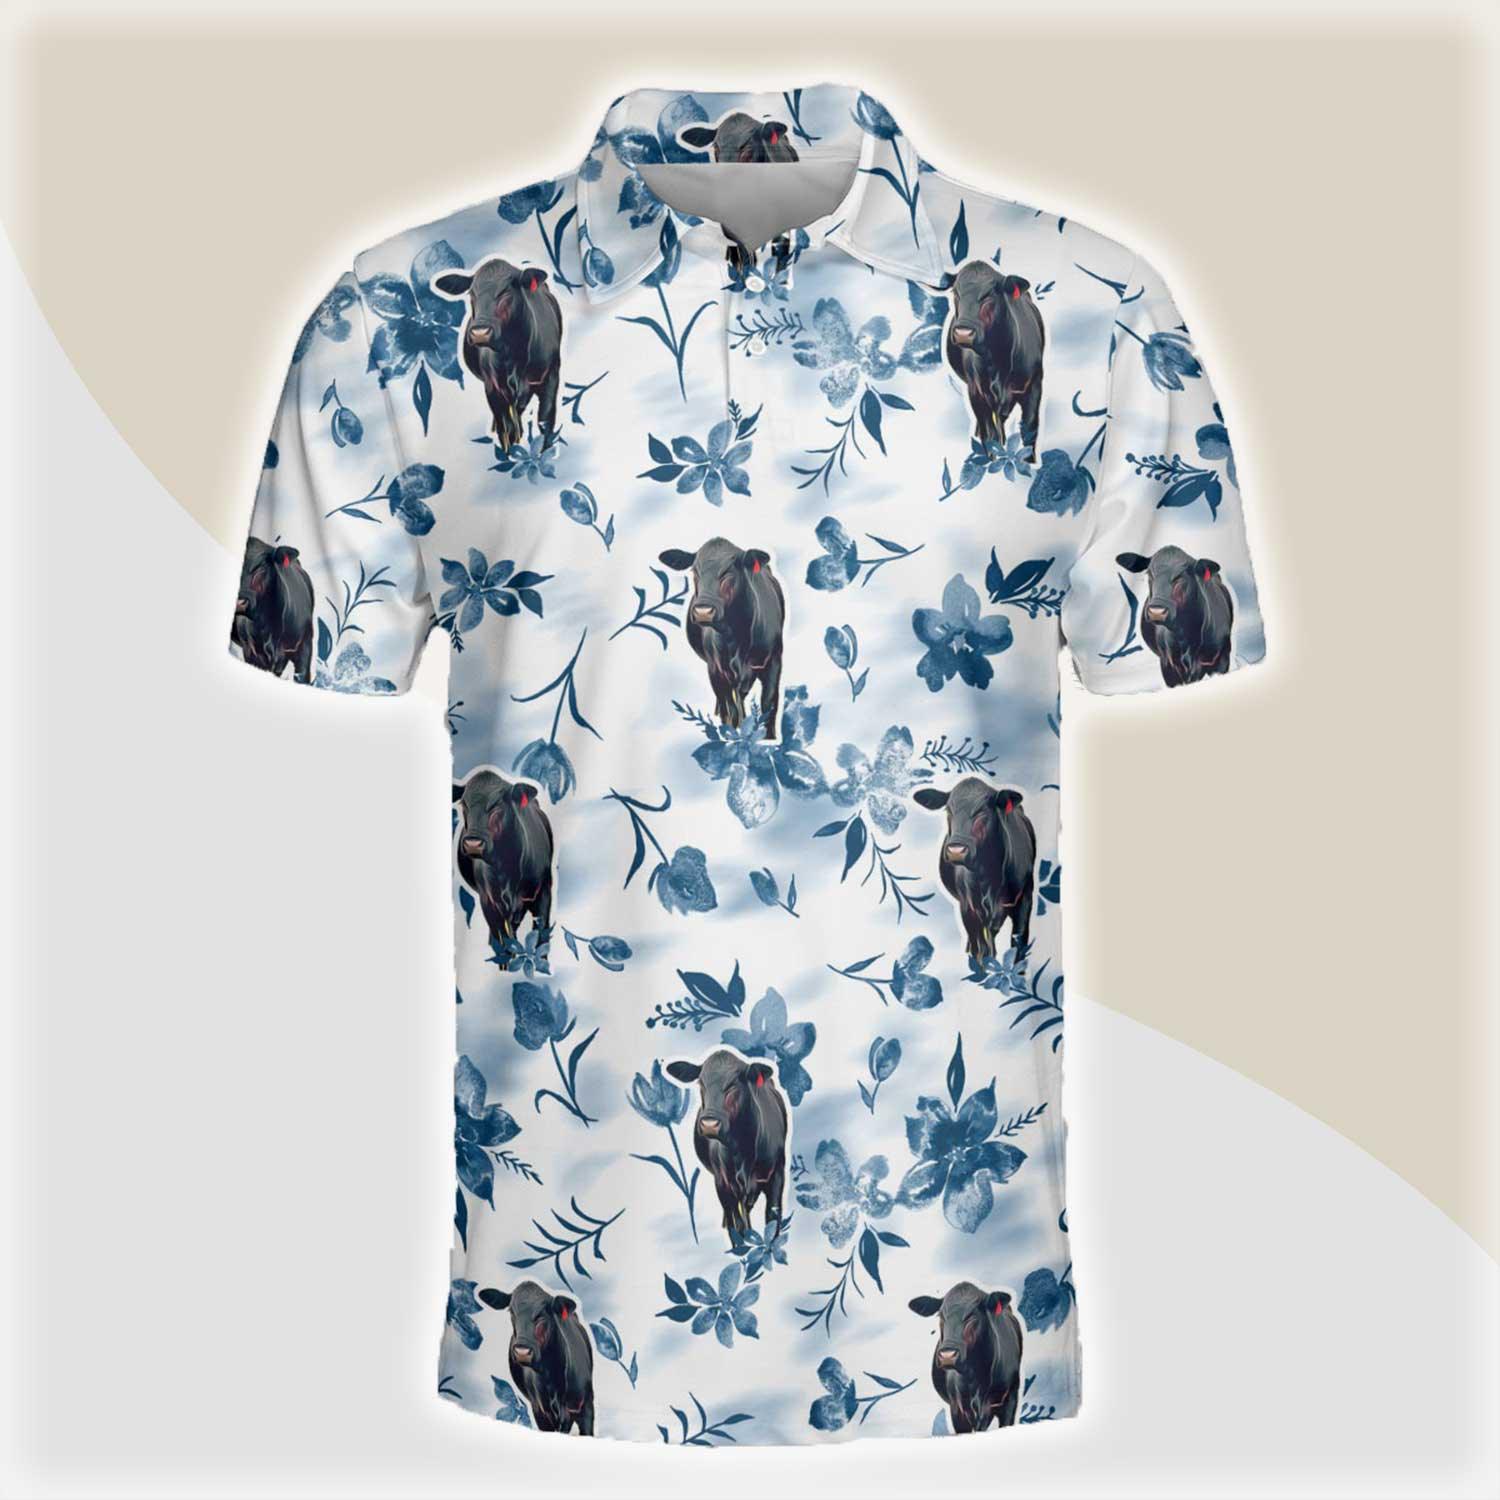 Black Angus Men Polo Shirts - Black Angus Watercolor Flowers and Leaves Tie Dye Pattern Button Shirts For Men - Perfect Gift For Black Angus Lovers - Amzanimalsgift